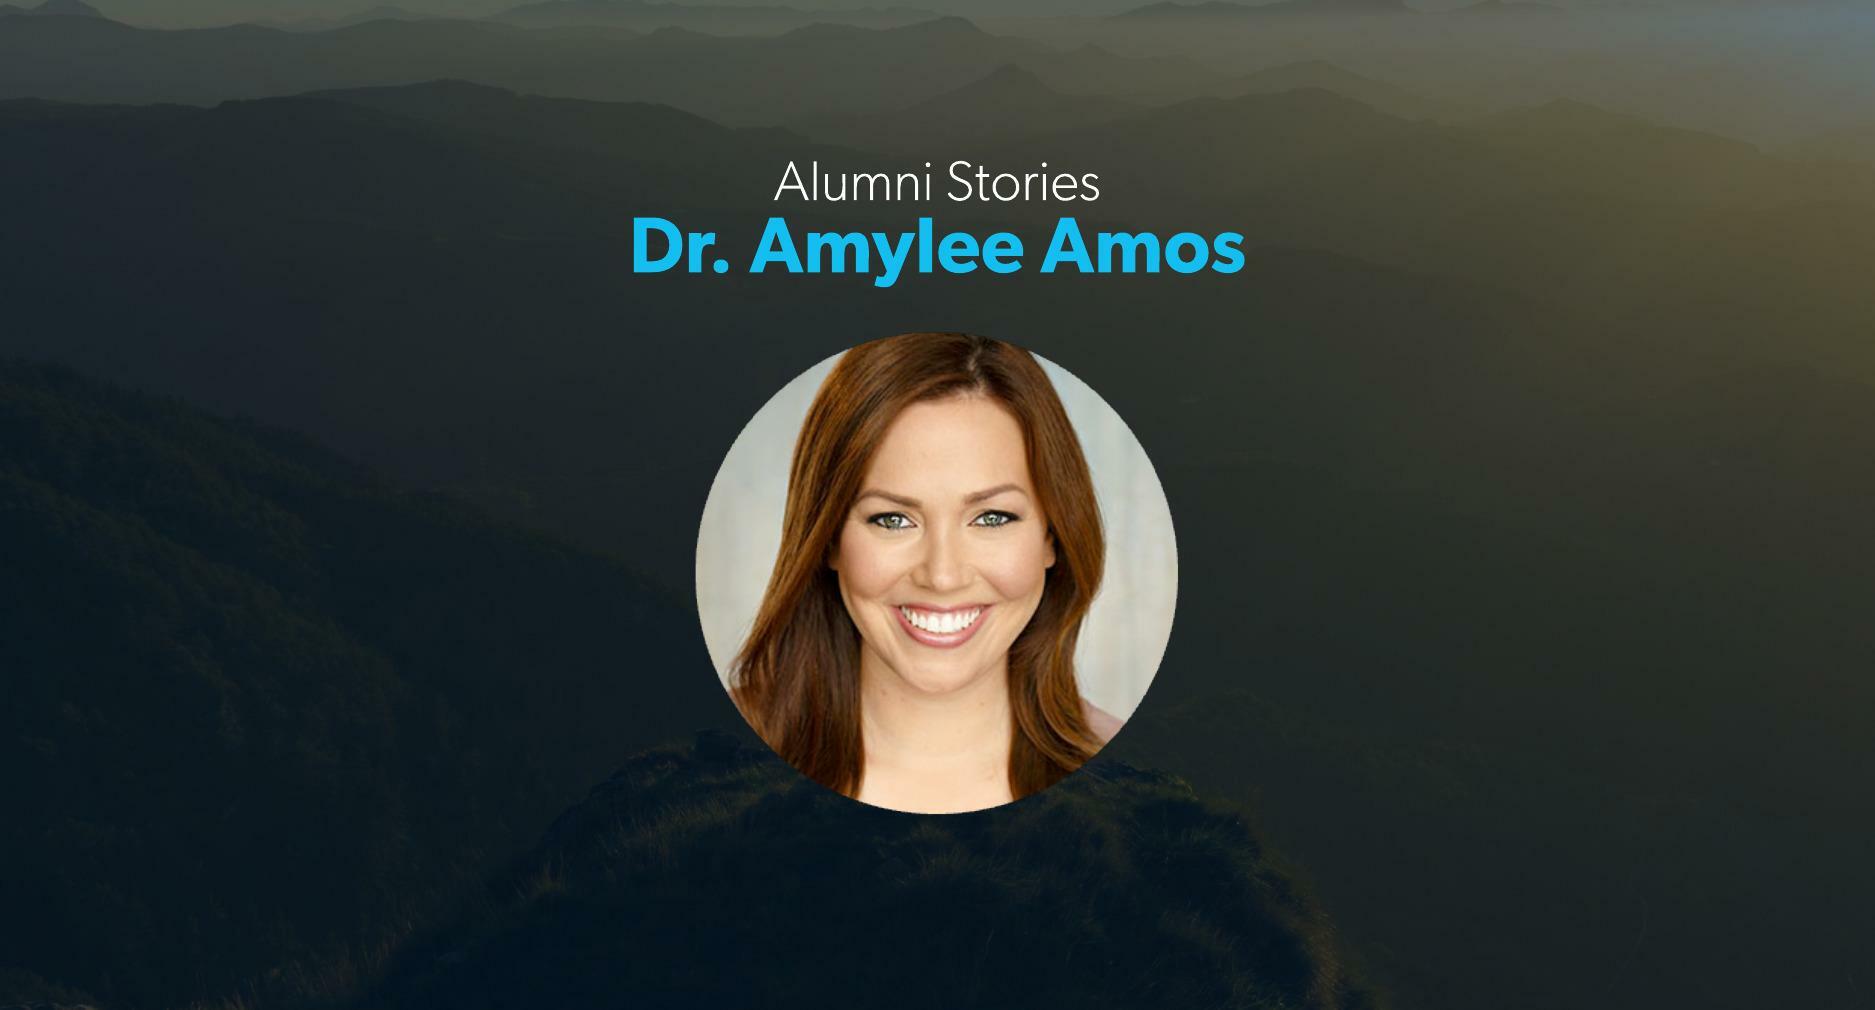 Dr. Amylee Amos smiles in a profile photo inset on a banner image under text displaying her name.